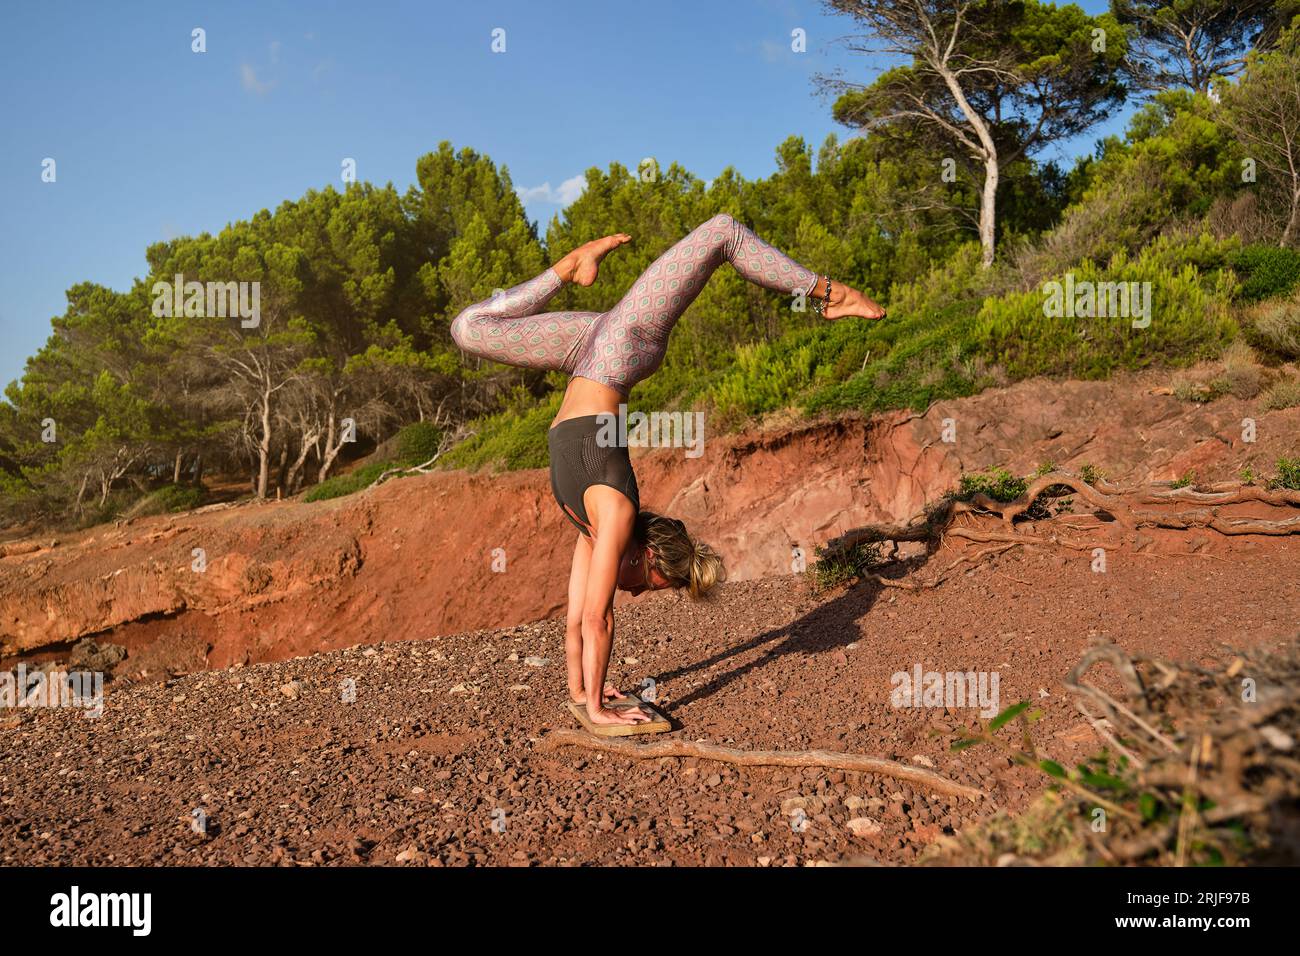 Woman in tights practicing a variation of handstand yoga pose with her feet up and her hands resting on a wooden board on a path in the middle of the Stock Photo